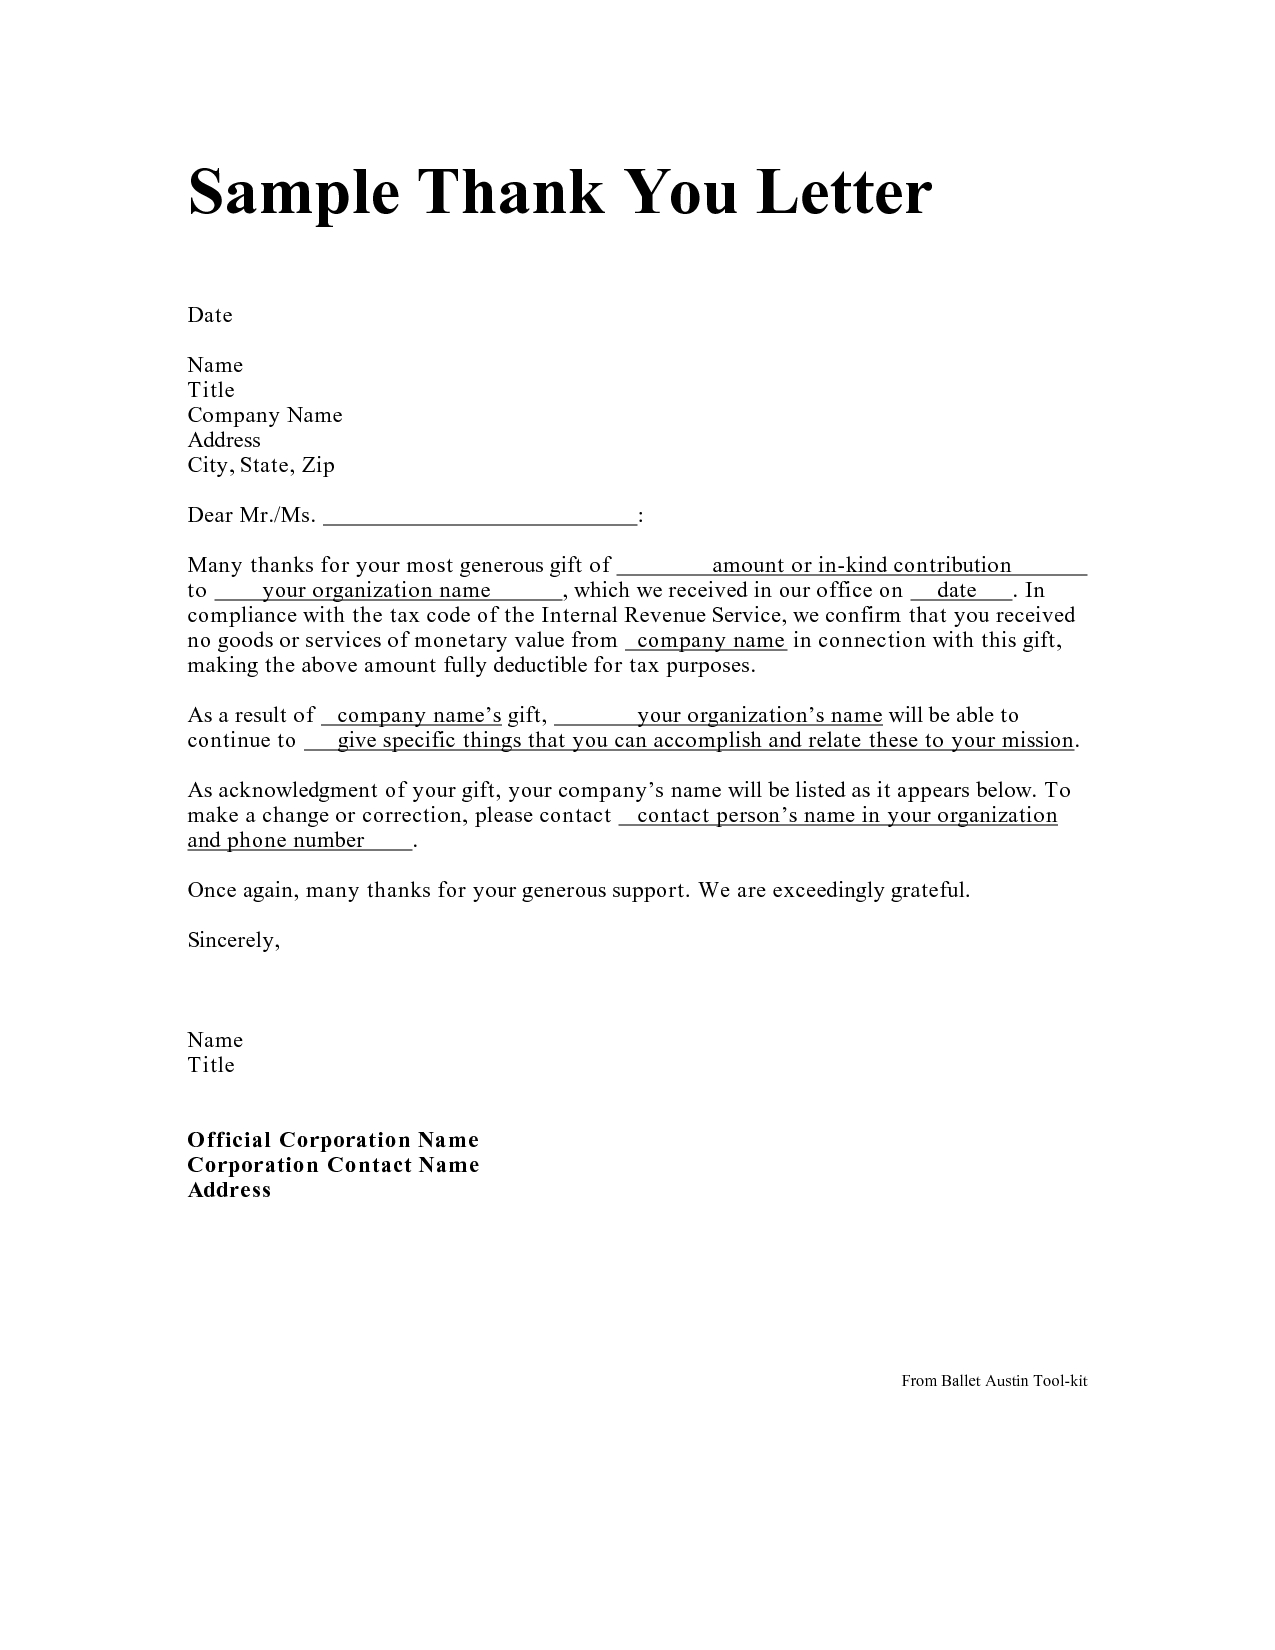 Car Gift Letter Template - Personal Thank You Letter Personal Thank You Letter Samples